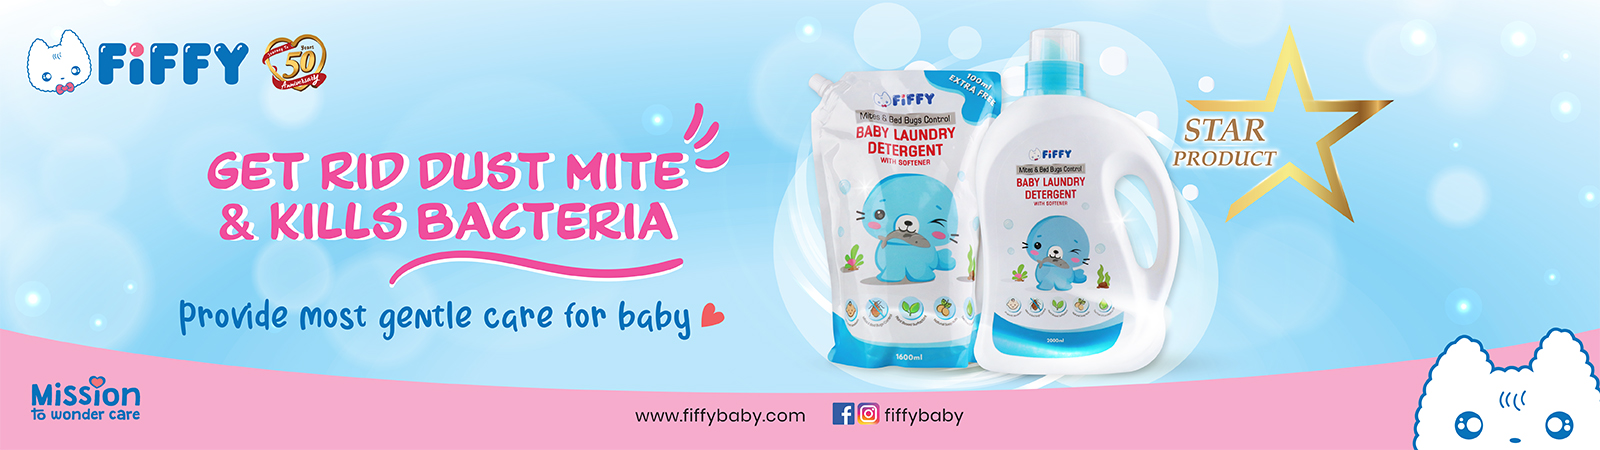 A gift of assurance from Fiffy Baby Laundry Detergent